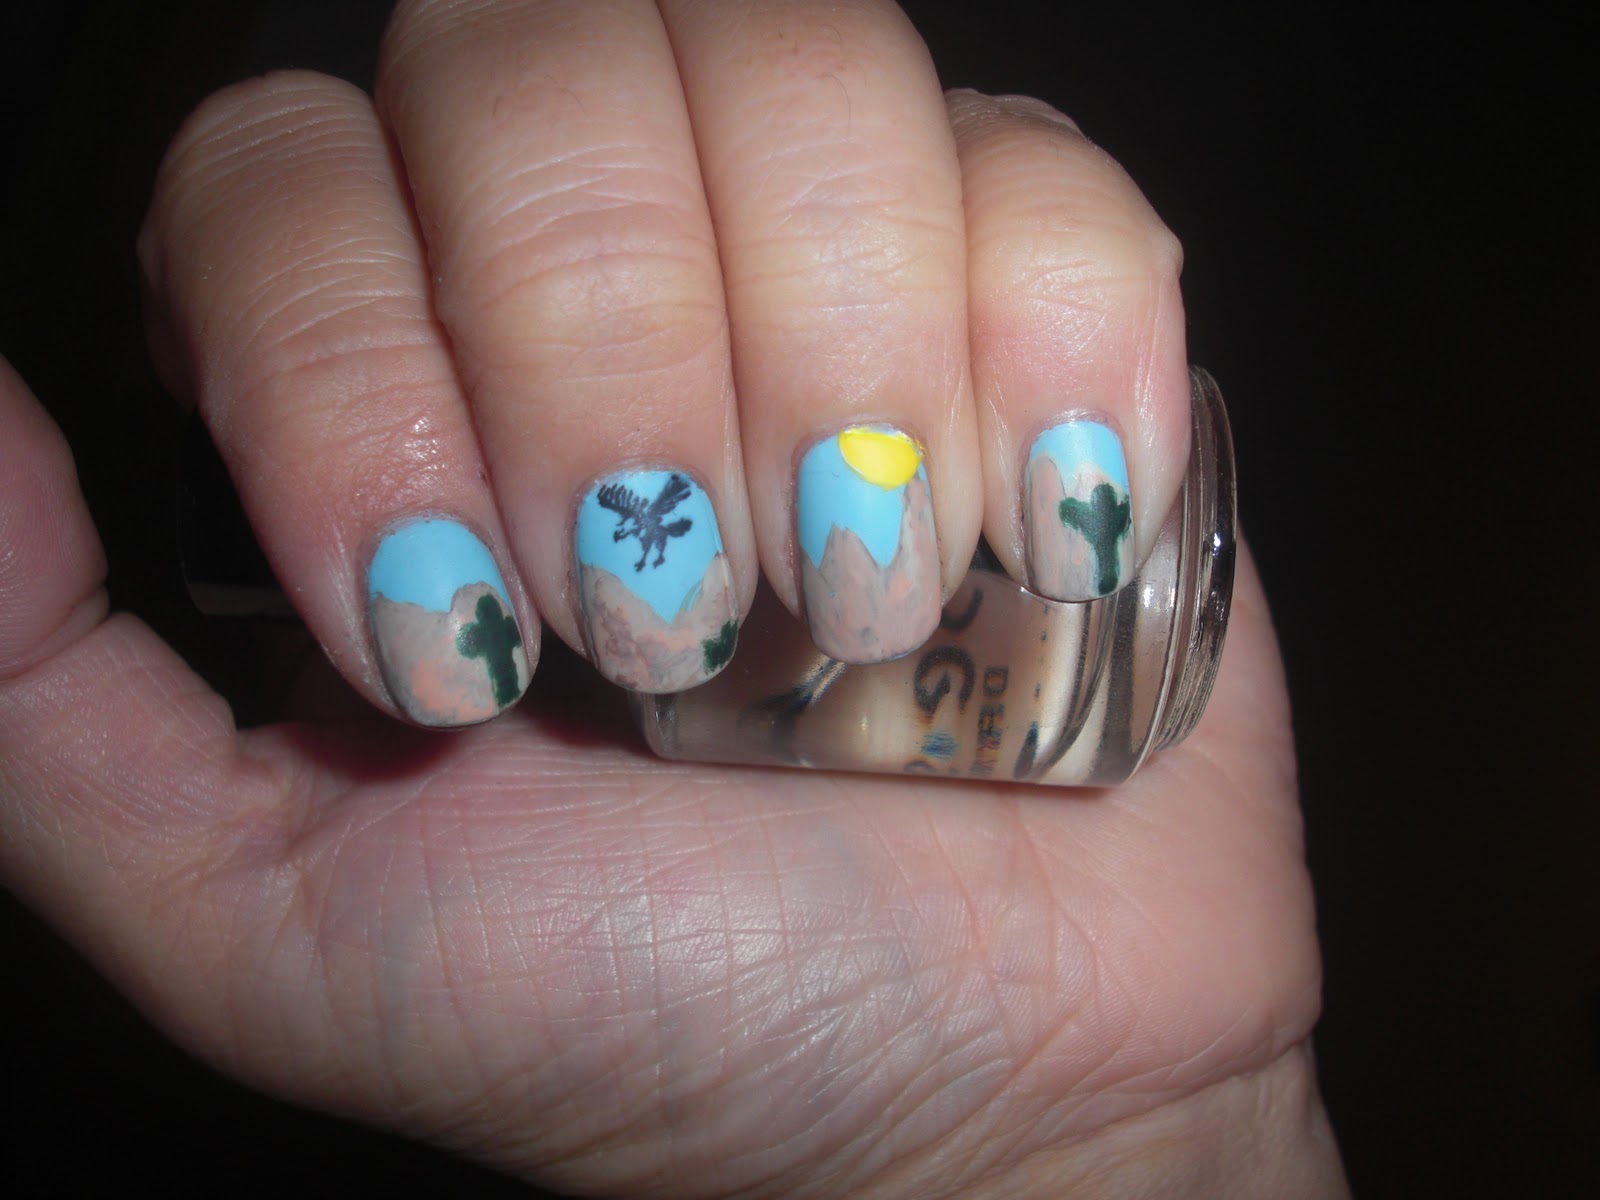 Western Themed Nail Art - wide 9